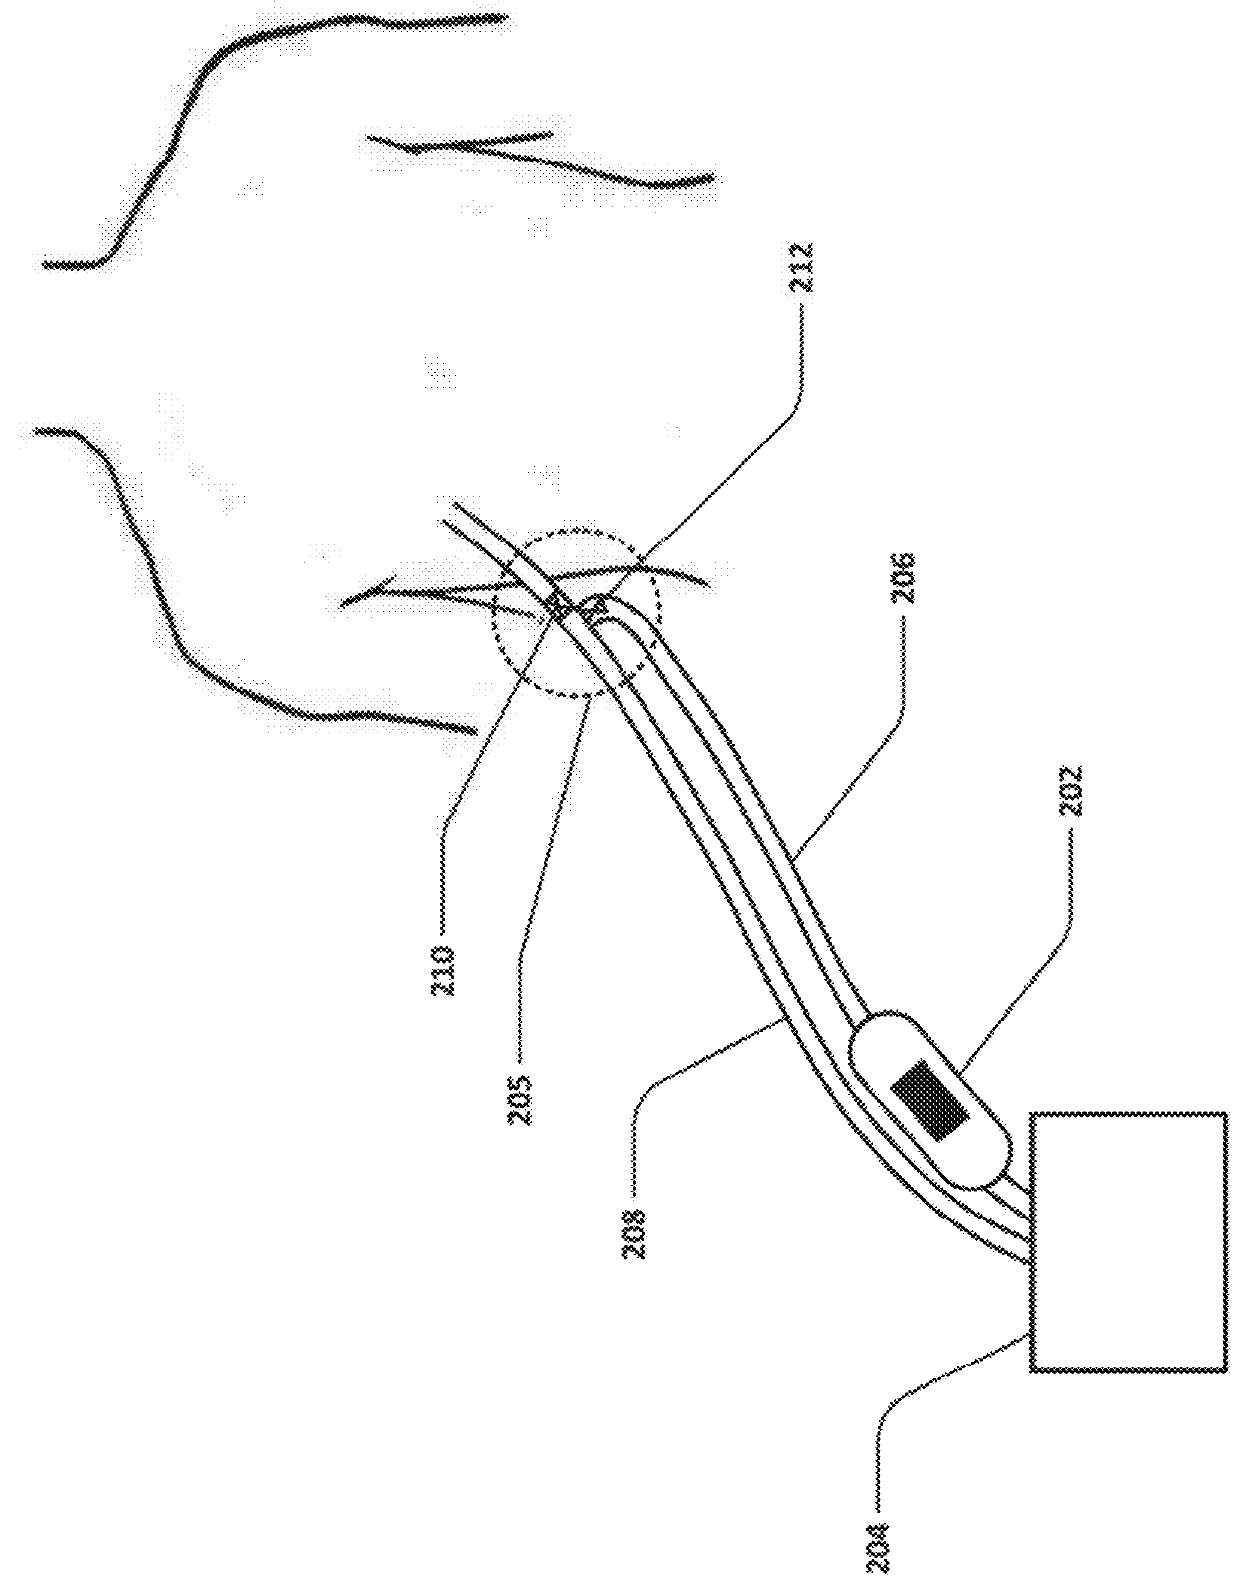 Devices and methods for managing chest drainage